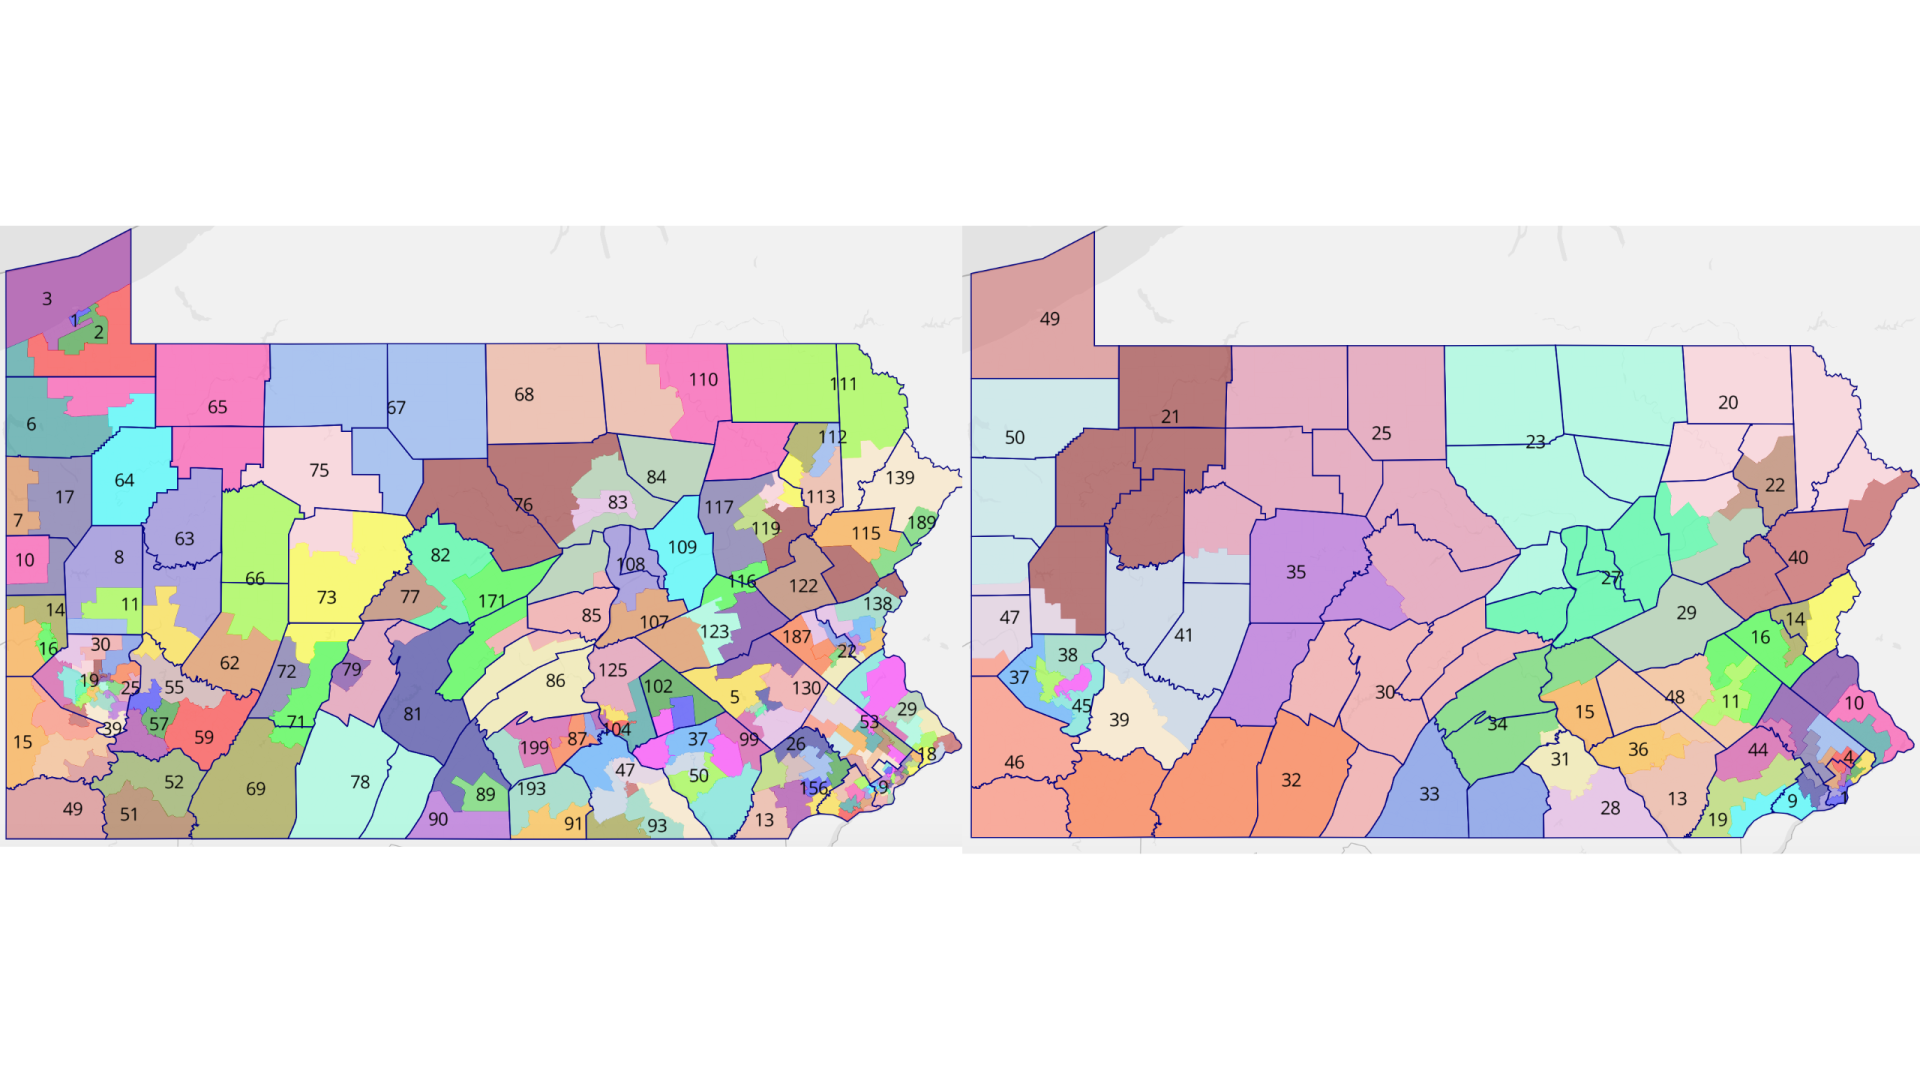 The LRC's proposed state legislative maps, approved at a Dec. 16, 2021 meeting, side-by-side.